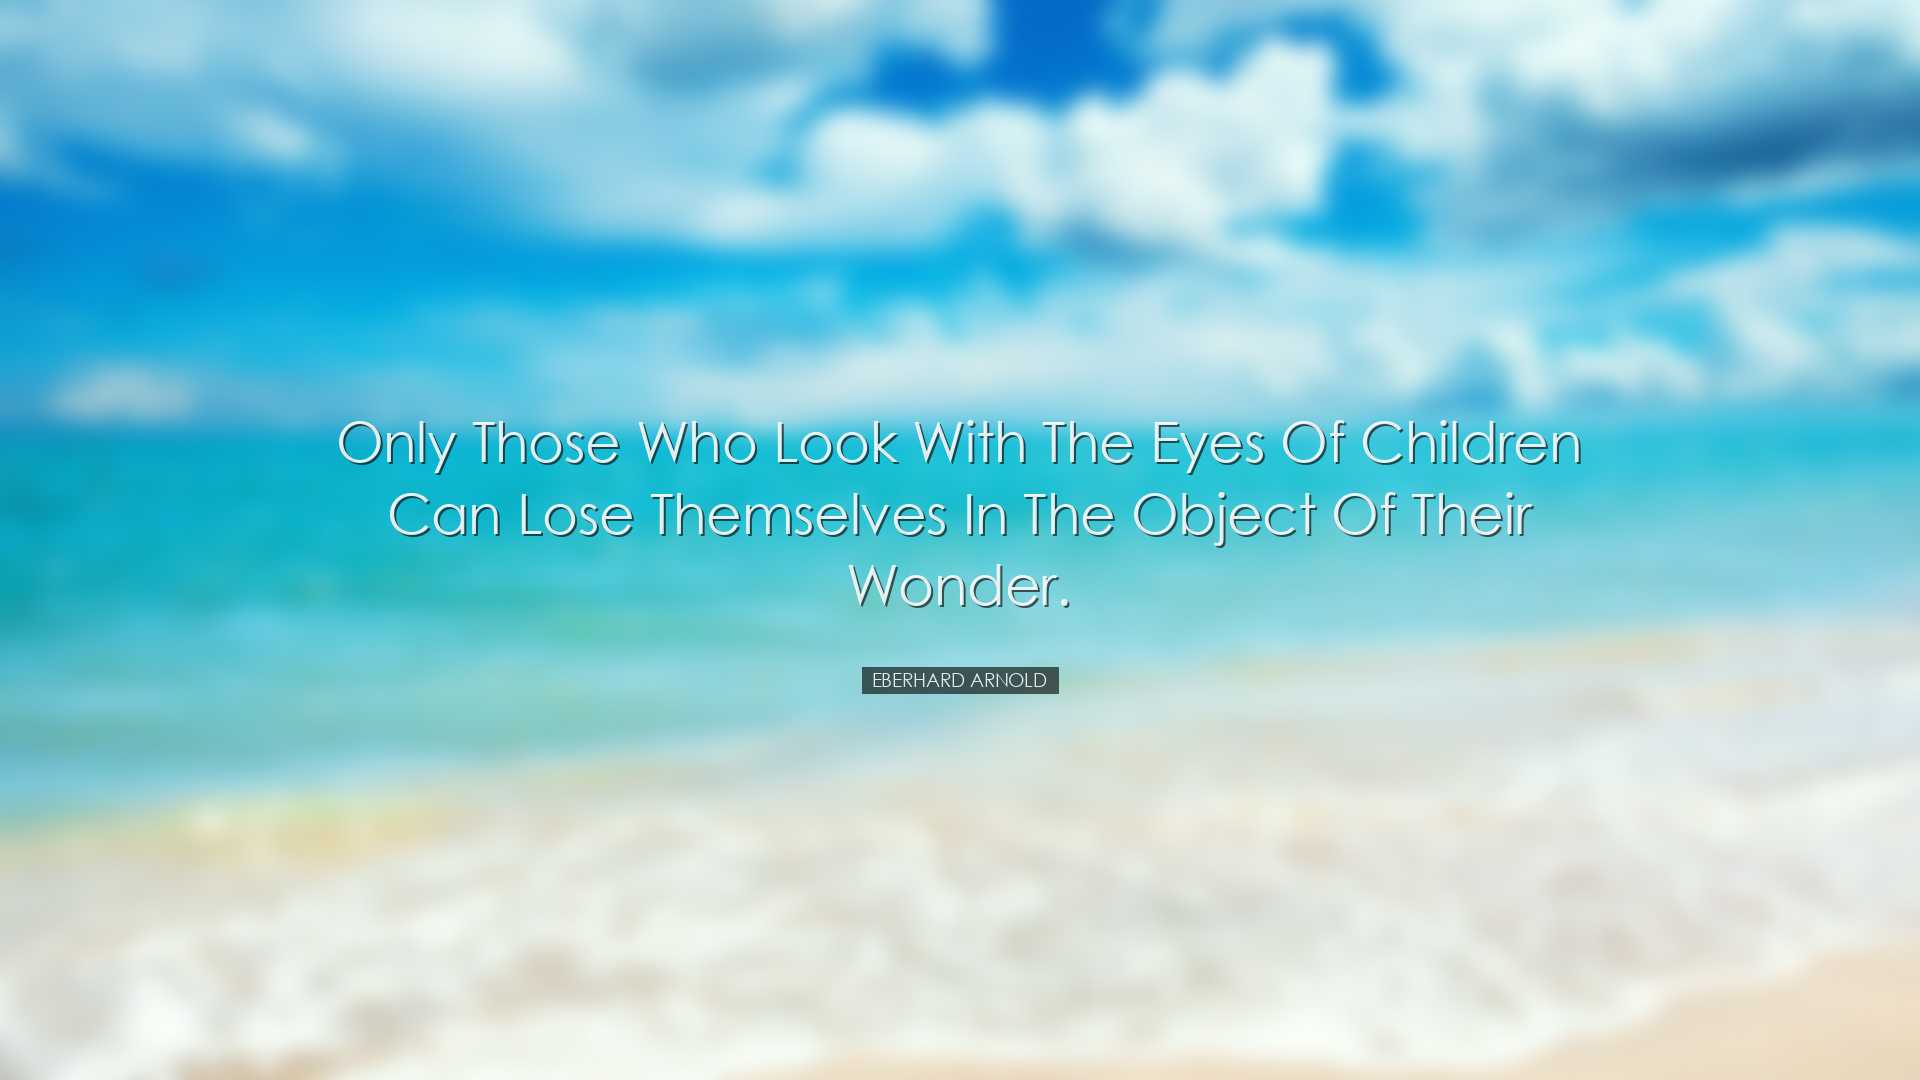 Only those who look with the eyes of children can lose themselves